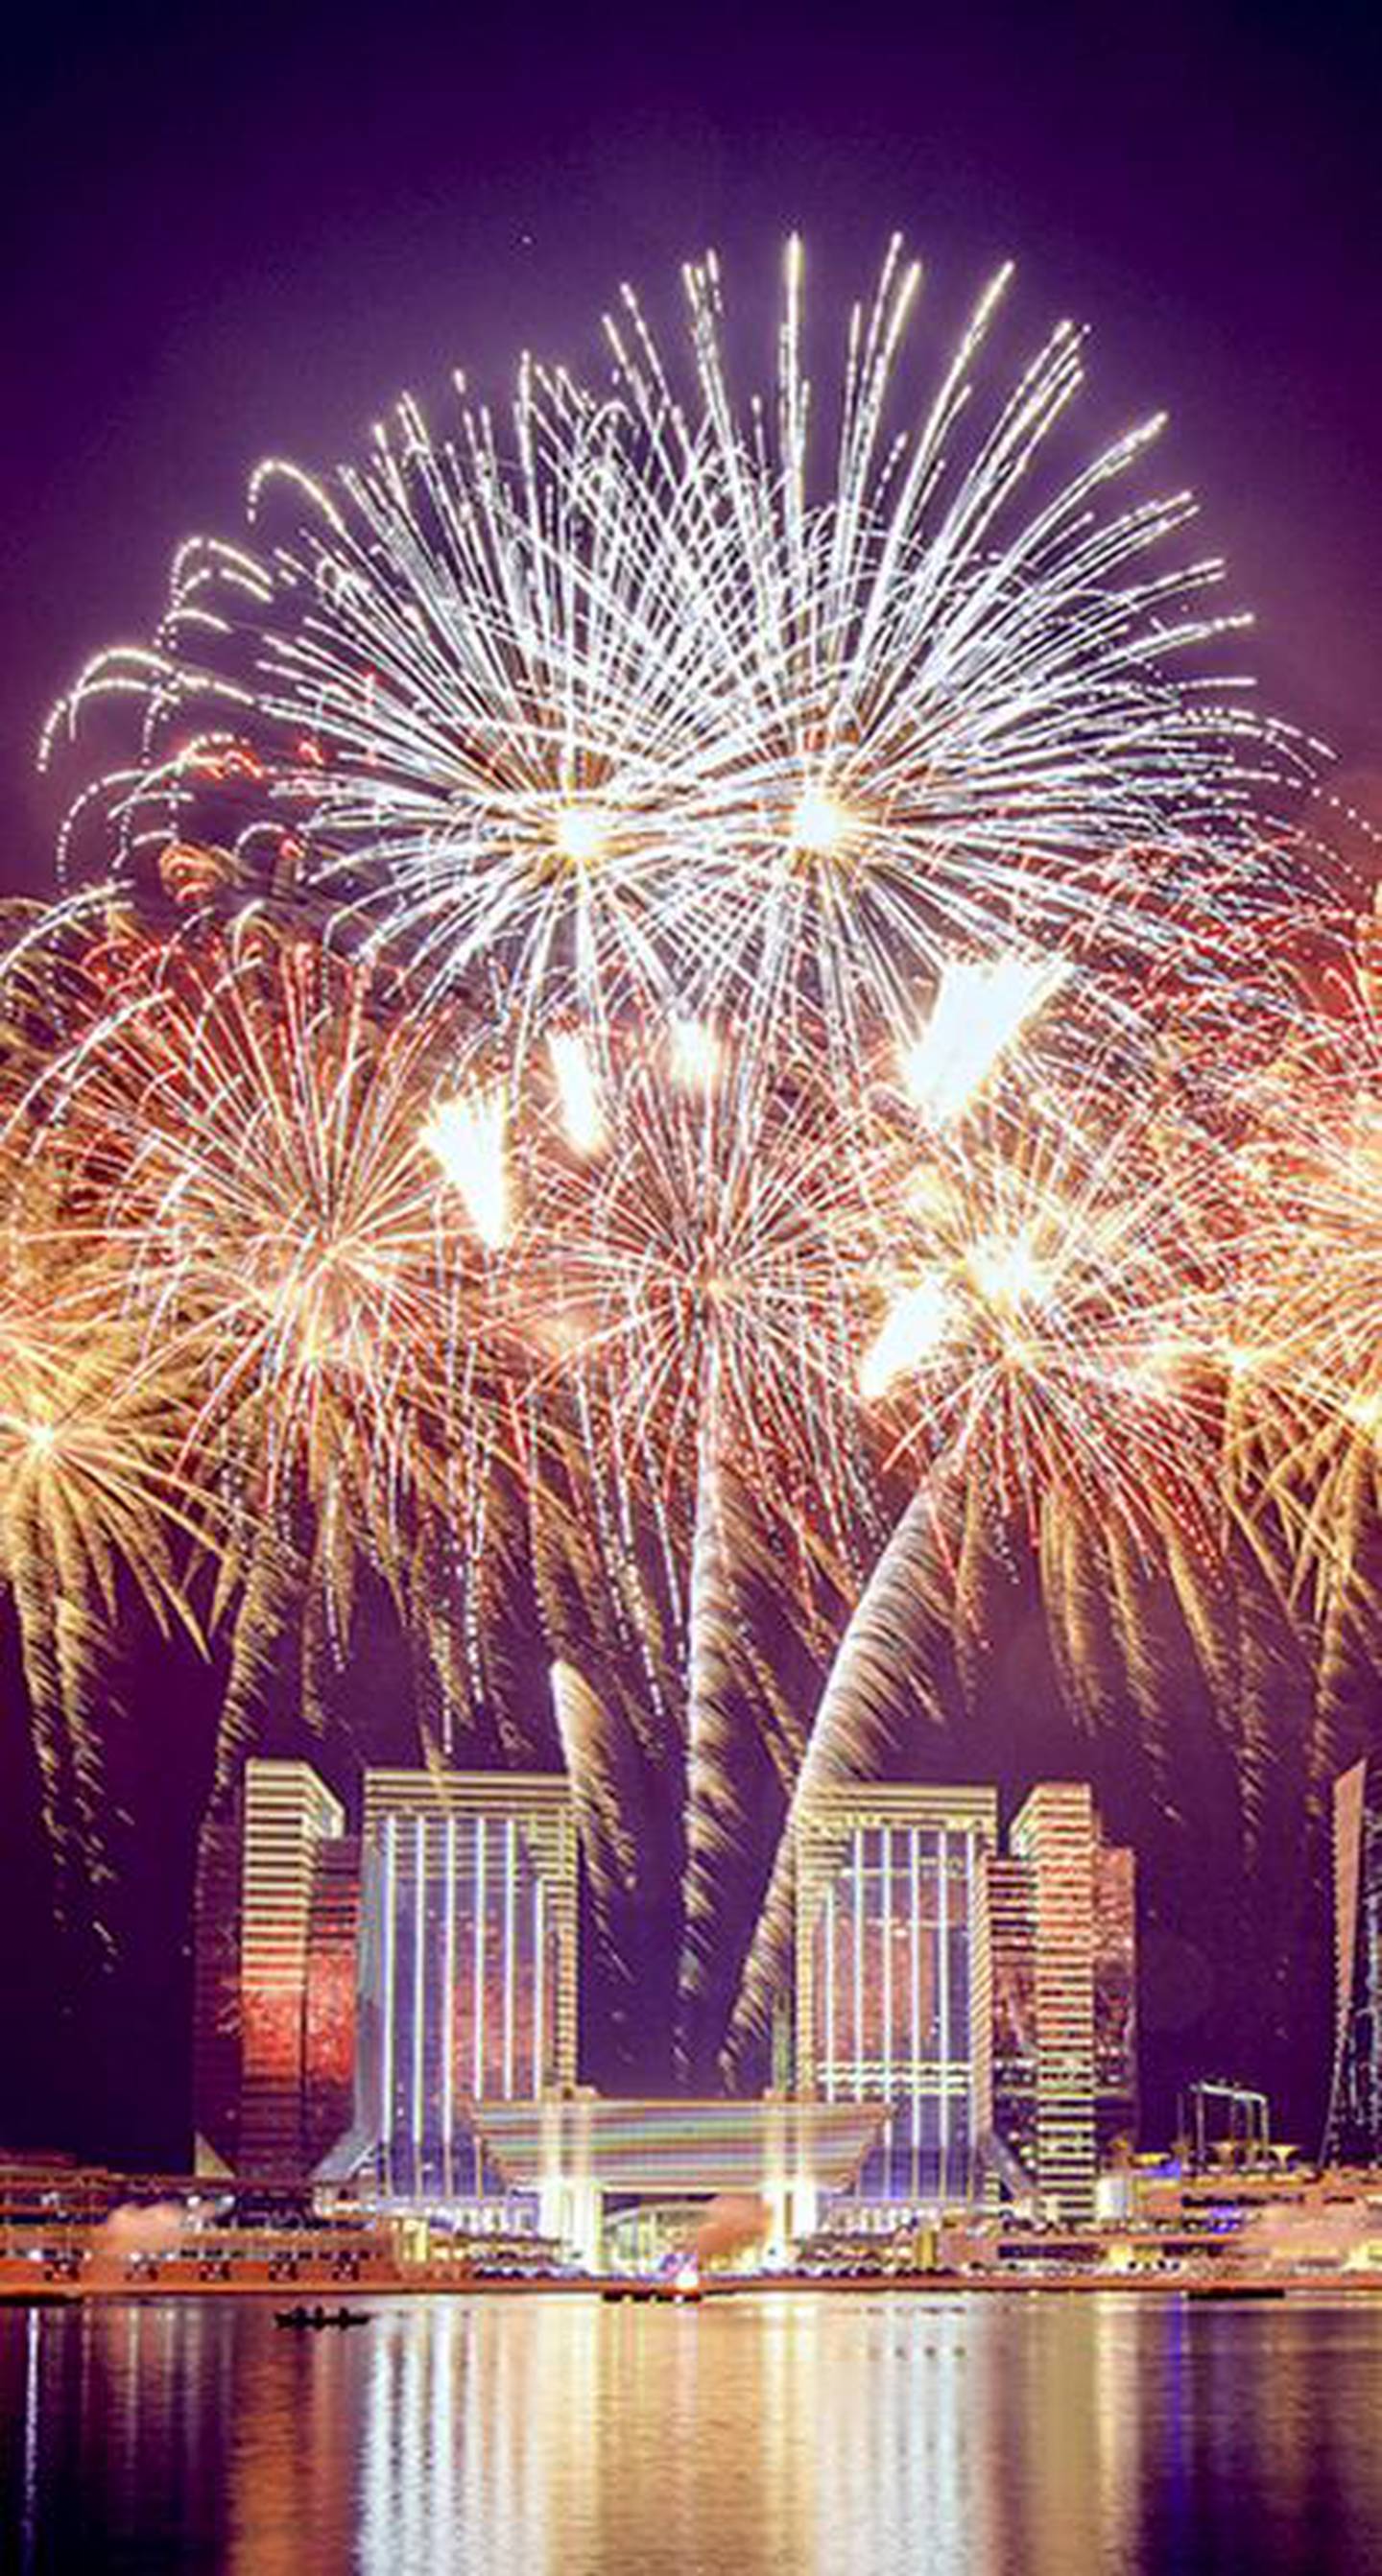 Al Maryah Island will ring in 2022 with a fireworks spectacle. Photo: Al Maryah Island